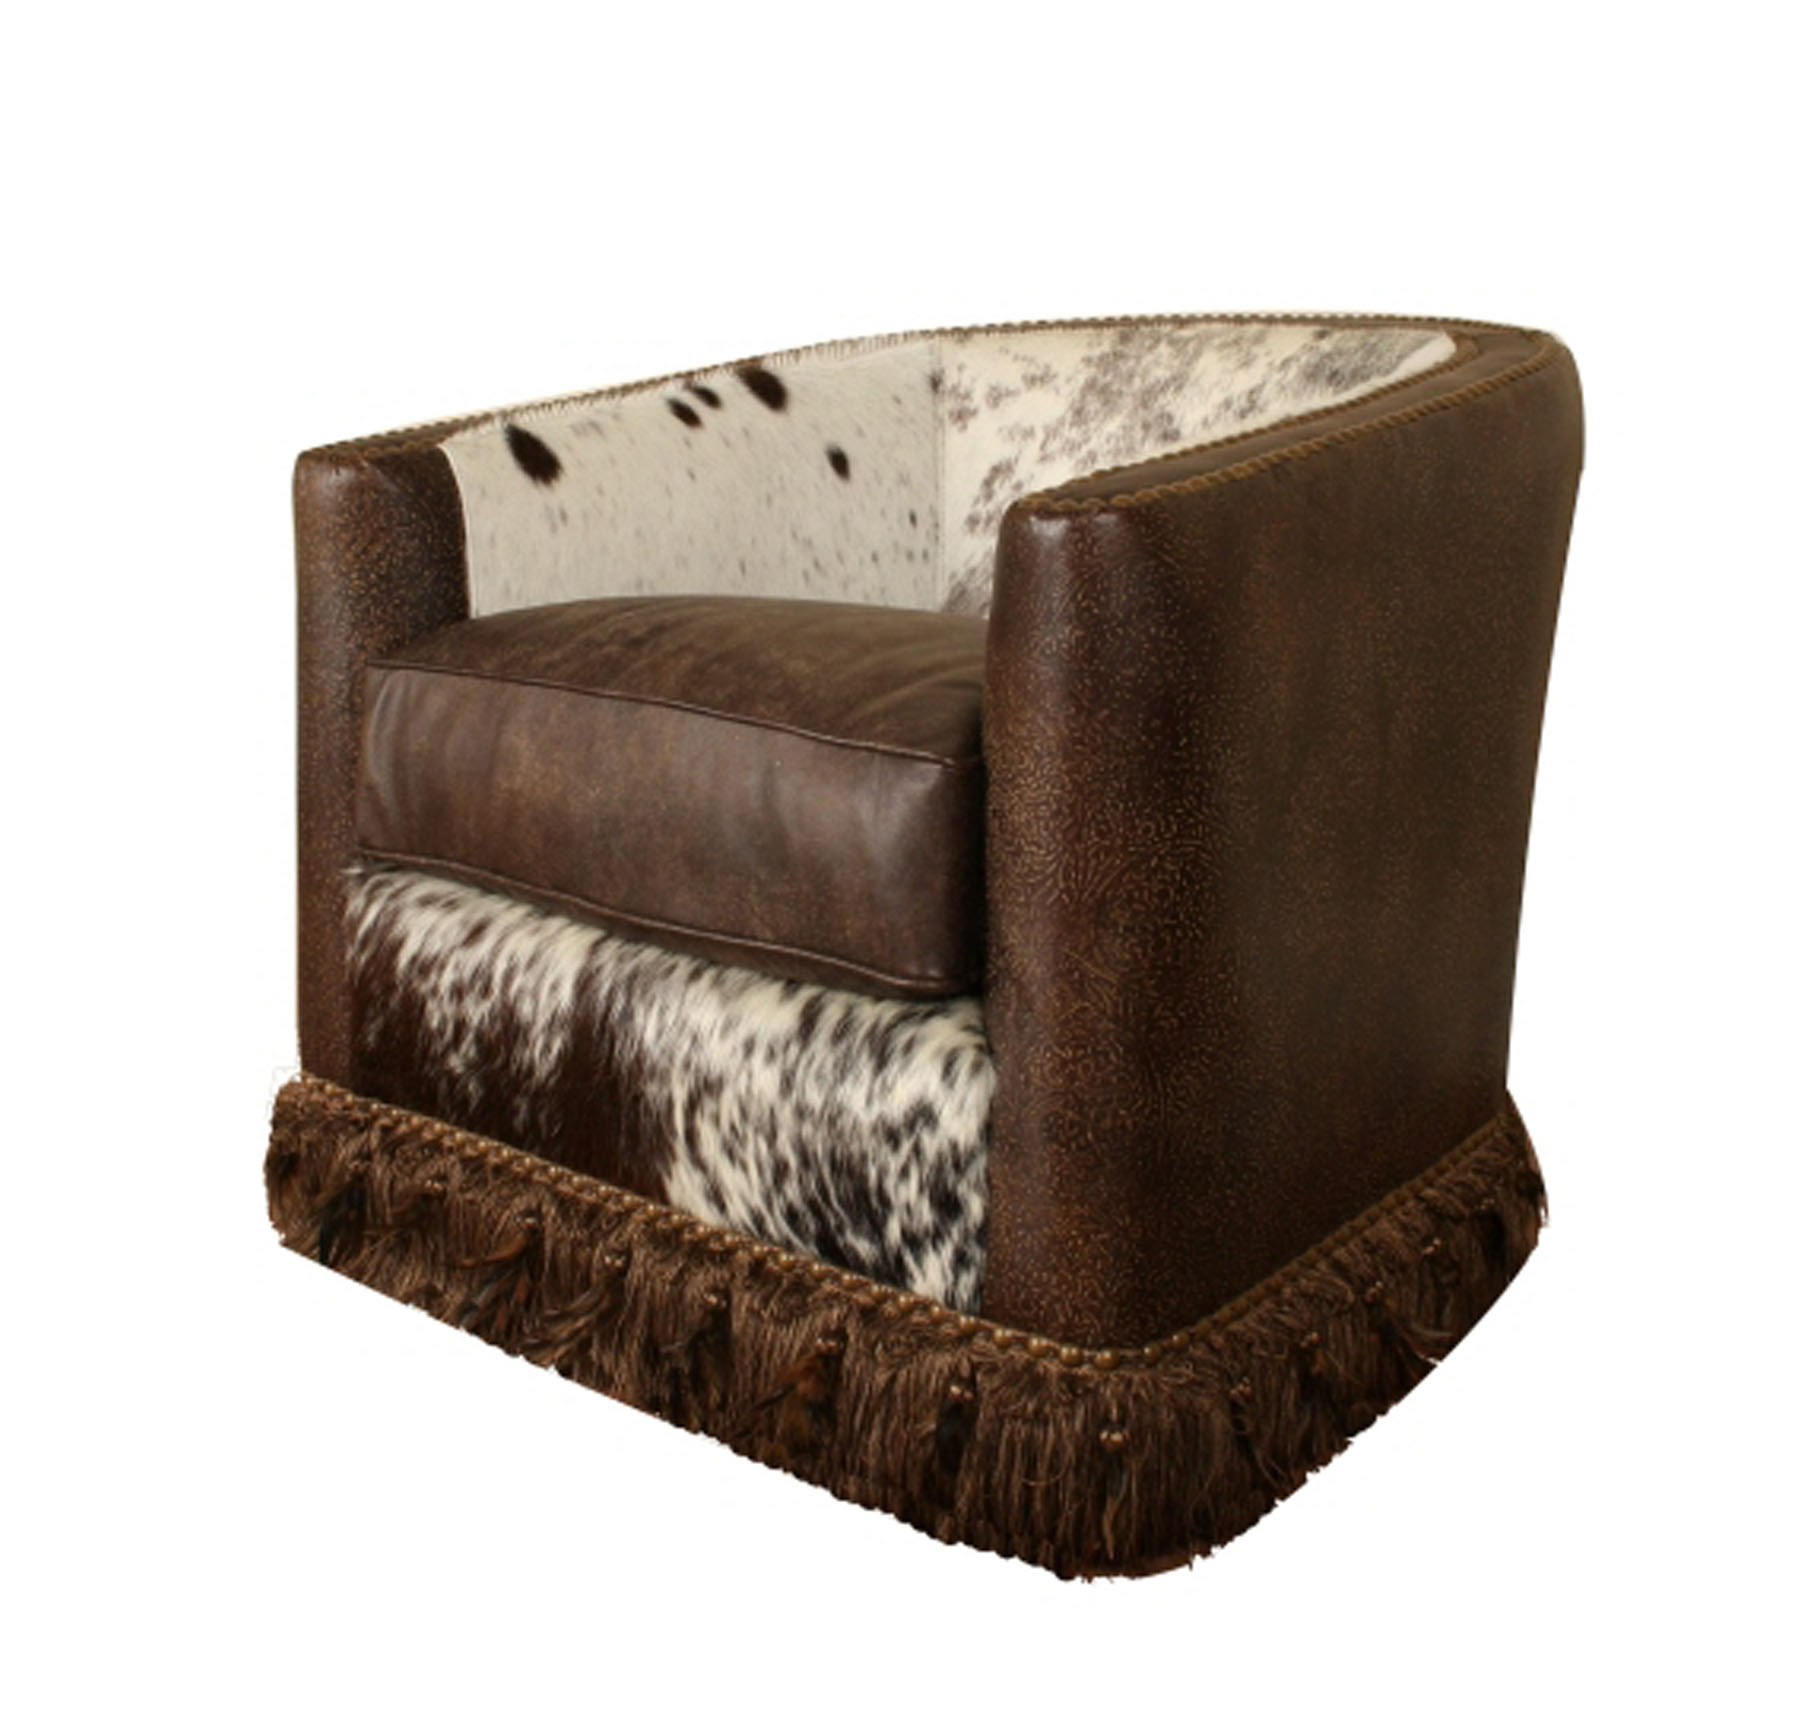 Barrel Swivel Chair Hill Country, Barrel Leather Chair